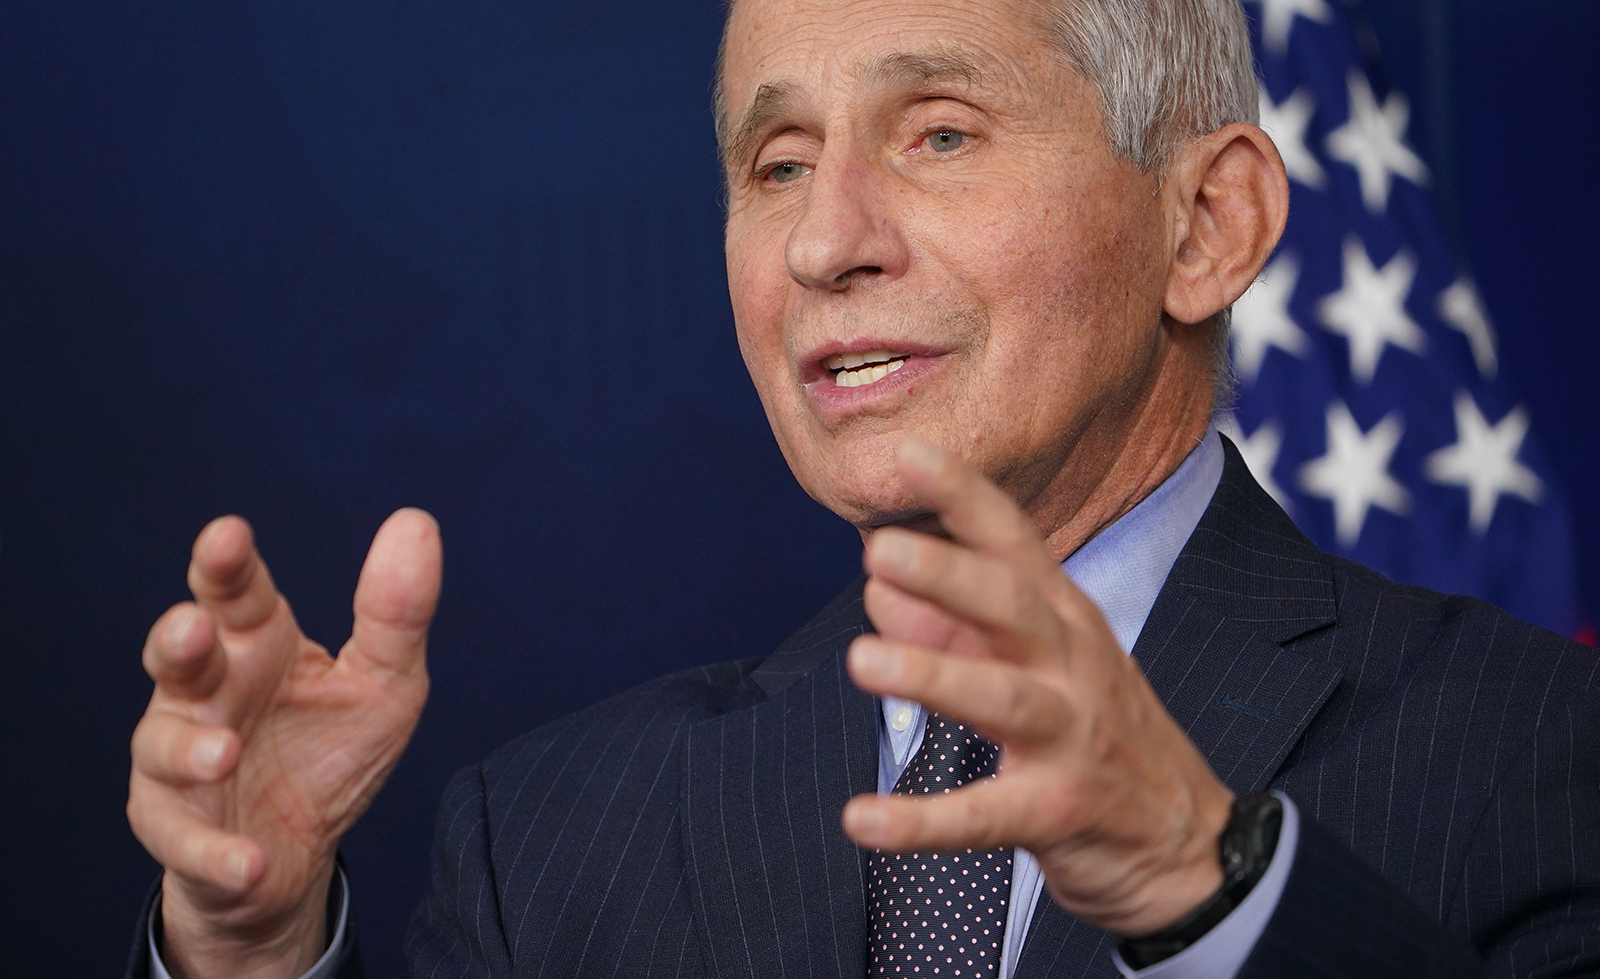 Dr. Anthony Fauci, Director of the National Institute of Allergy and Infectious Diseases, speaks during the daily briefing at the White House in Washington, DC, on January 21.